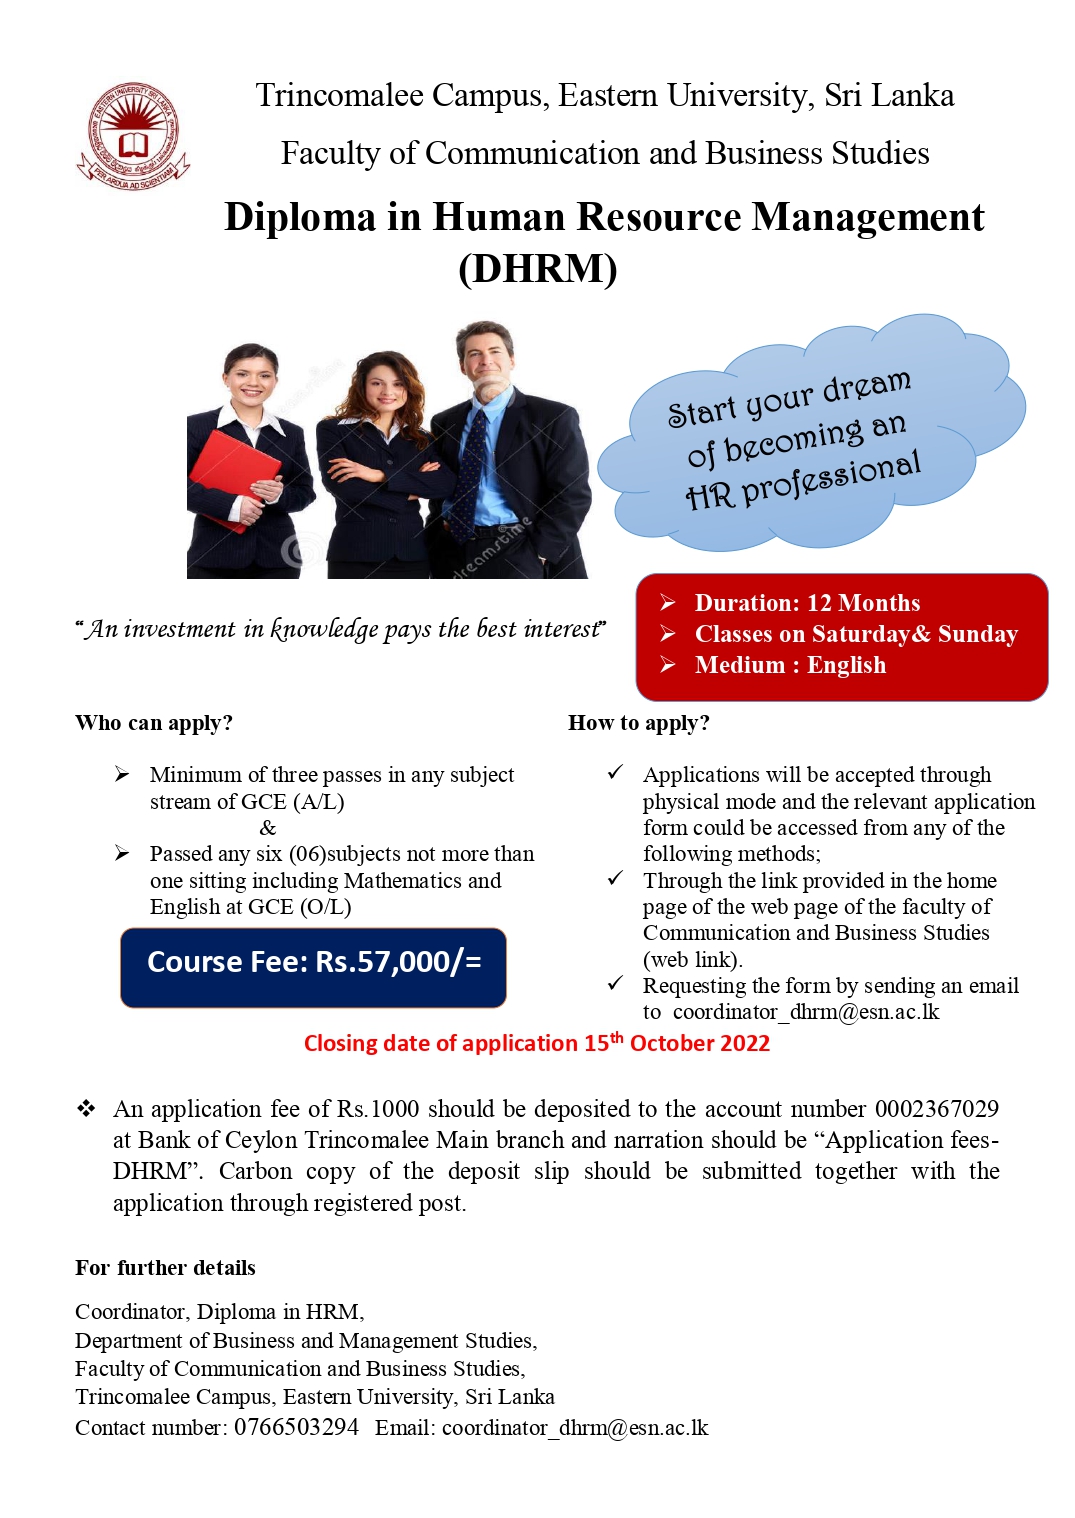 Diploma in Human Resource Management (DHRM) 2022 - Eastern University Courses Details, Application